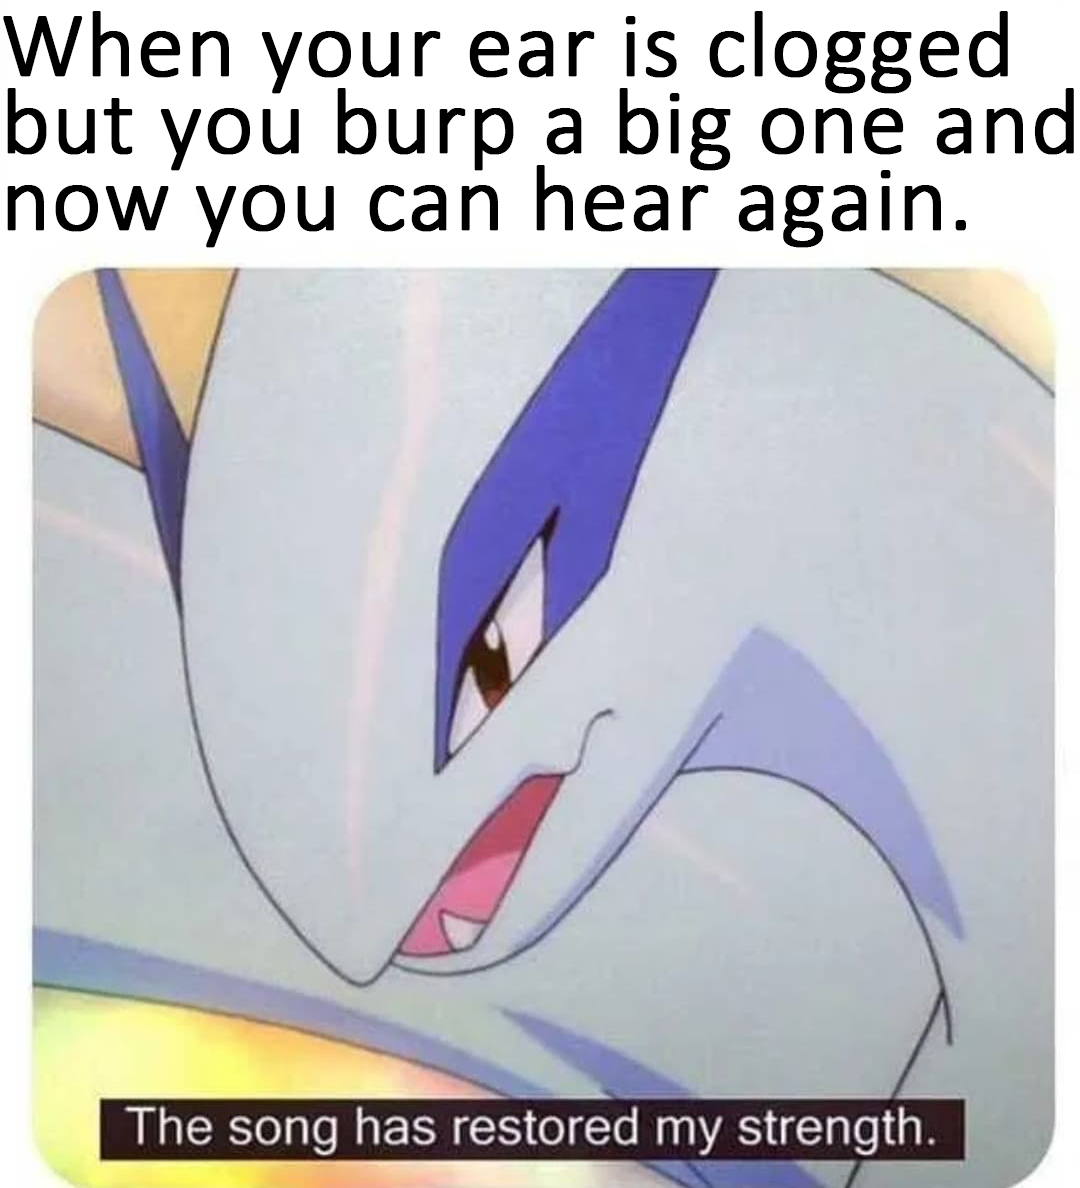 dank memes - funny memes - cartoon - When your ear is clogged but you burp a big one and now you can hear again. The song has restored my strength.